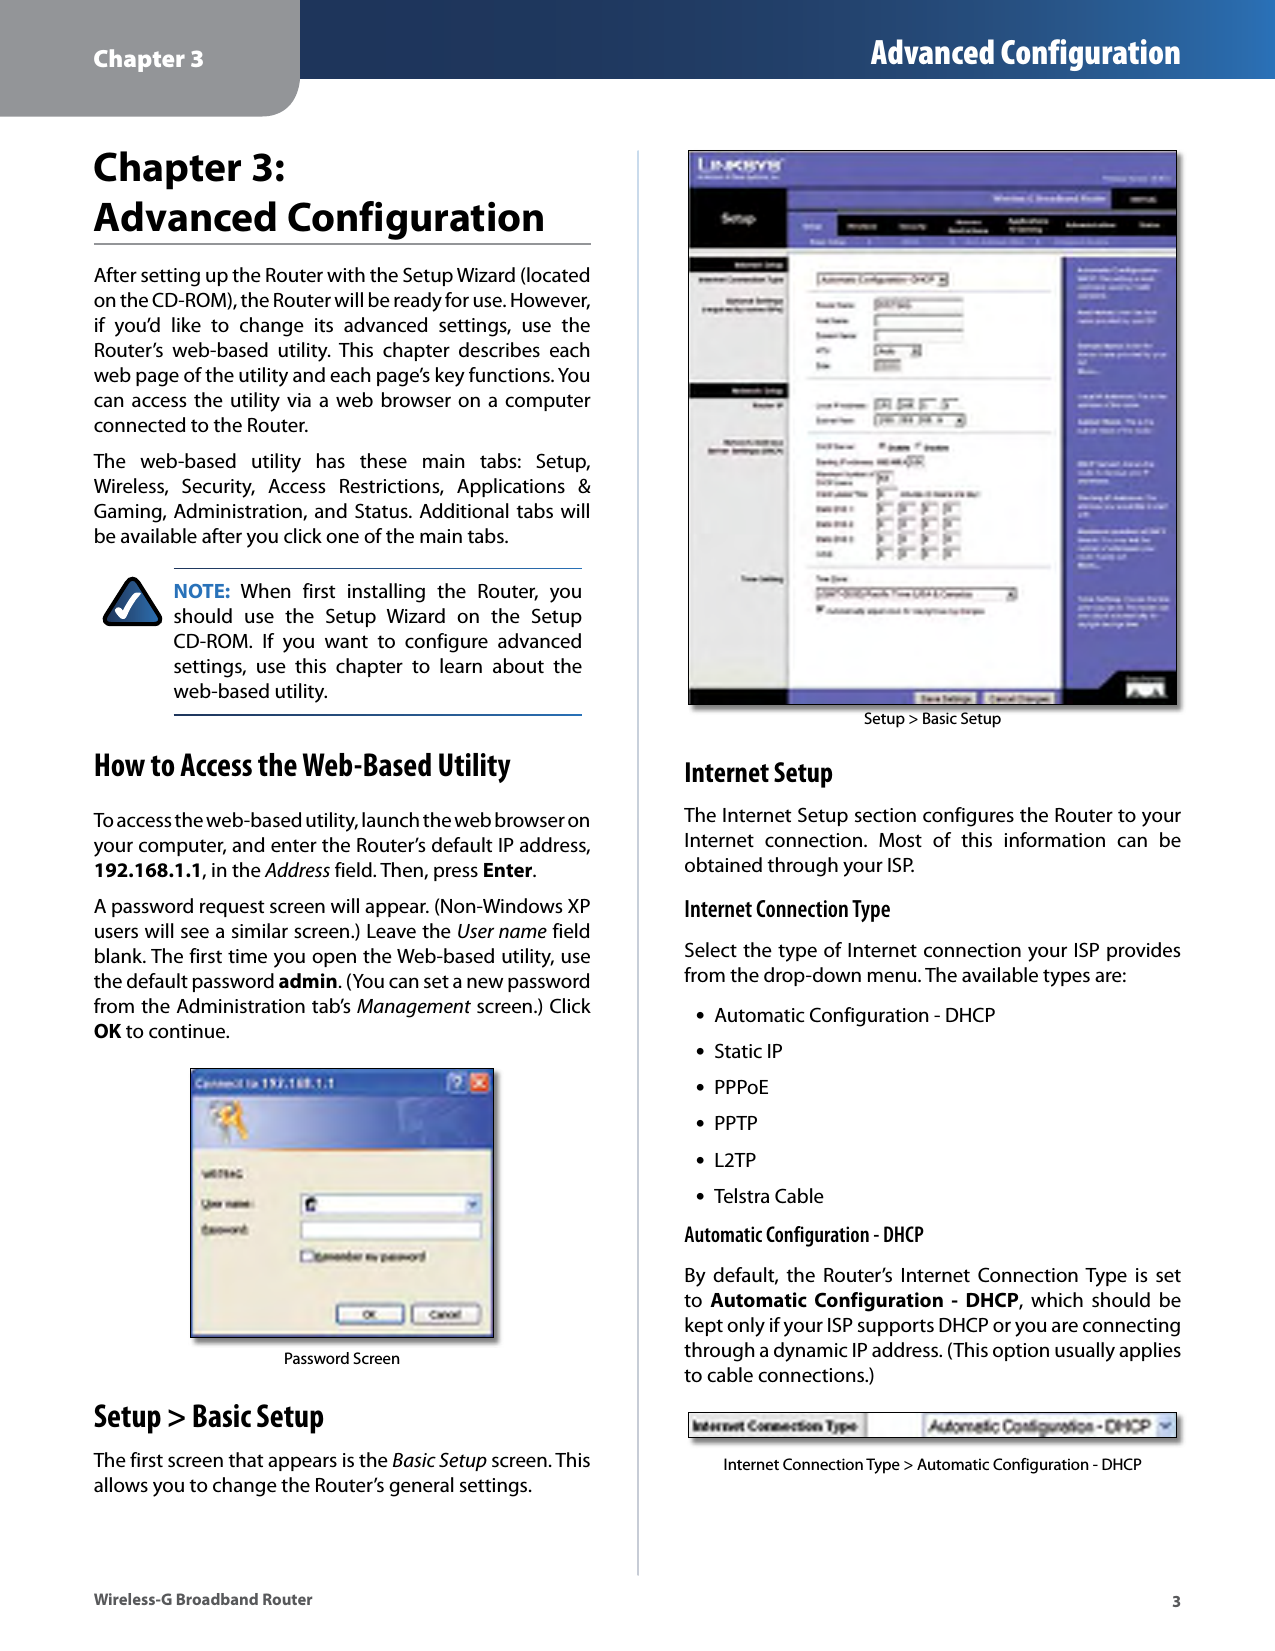 Chapter 3 Advanced Configuration Chapter 3: Advanced ConfigurationAfter setting up the Router with the Setup Wizard (located on the CD-ROM), the Router will be ready for use. However, if  you’d  like  to  change  its  advanced  settings,  use  the Router’s  web-based  utility.  This  chapter  describes  each web page of the utility and each page’s key functions. You can access the utility  via  a  web  browser on a  computer connected to the Router. The  web-based  utility  has  these  main  tabs:  Setup, Wireless,  Security,  Access  Restrictions,  Applications  &amp; Gaming, Administration, and  Status. Additional tabs will be available after you click one of the main tabs. NOTE:  When  first  installing  the  Router,  you should  use  the  Setup  Wizard  on  the  Setup CD-ROM.  If  you  want  to  configure  advanced settings,  use  this  chapter  to  learn  about  the web-based utility. How to Access the Web-Based Utility To access the web-based utility, launch the web browser on your computer, and enter the Router’s default IP address, 192.168.1.1, in the Address field. Then, press Enter. A password request screen will appear. (Non-Windows XP users will see a similar screen.) Leave the User name field blank. The first time you open the Web-based utility, use the default password admin. (You can set a new password from the Administration tab’s Management  screen.) Click OK to continue. Password Screen Setup &gt; Basic Setup The first screen that appears is the Basic Setup screen. This allows you to change the Router’s general settings. Setup &gt; Basic Setup Internet Setup The Internet Setup section configures the Router to your Internet  connection.  Most  of  this  information  can  be obtained through your ISP. Internet Connection Type Select the type of Internet connection your ISP provides from the drop-down menu. The available types are: •Automatic Configuration - DHCP •Static IP •PPPoE •PPTP •L2TP •Telstra Cable Automatic Configuration - DHCP By  default,  the  Router’s  Internet  Connection Type  is  set to  Automatic  Configuration  - DHCP,  which  should  be kept only if your ISP supports DHCP or you are connecting through a dynamic IP address. (This option usually applies to cable connections.) Internet Connection Type &gt; Automatic Configuration - DHCP Wireless-G Broadband Router  3 